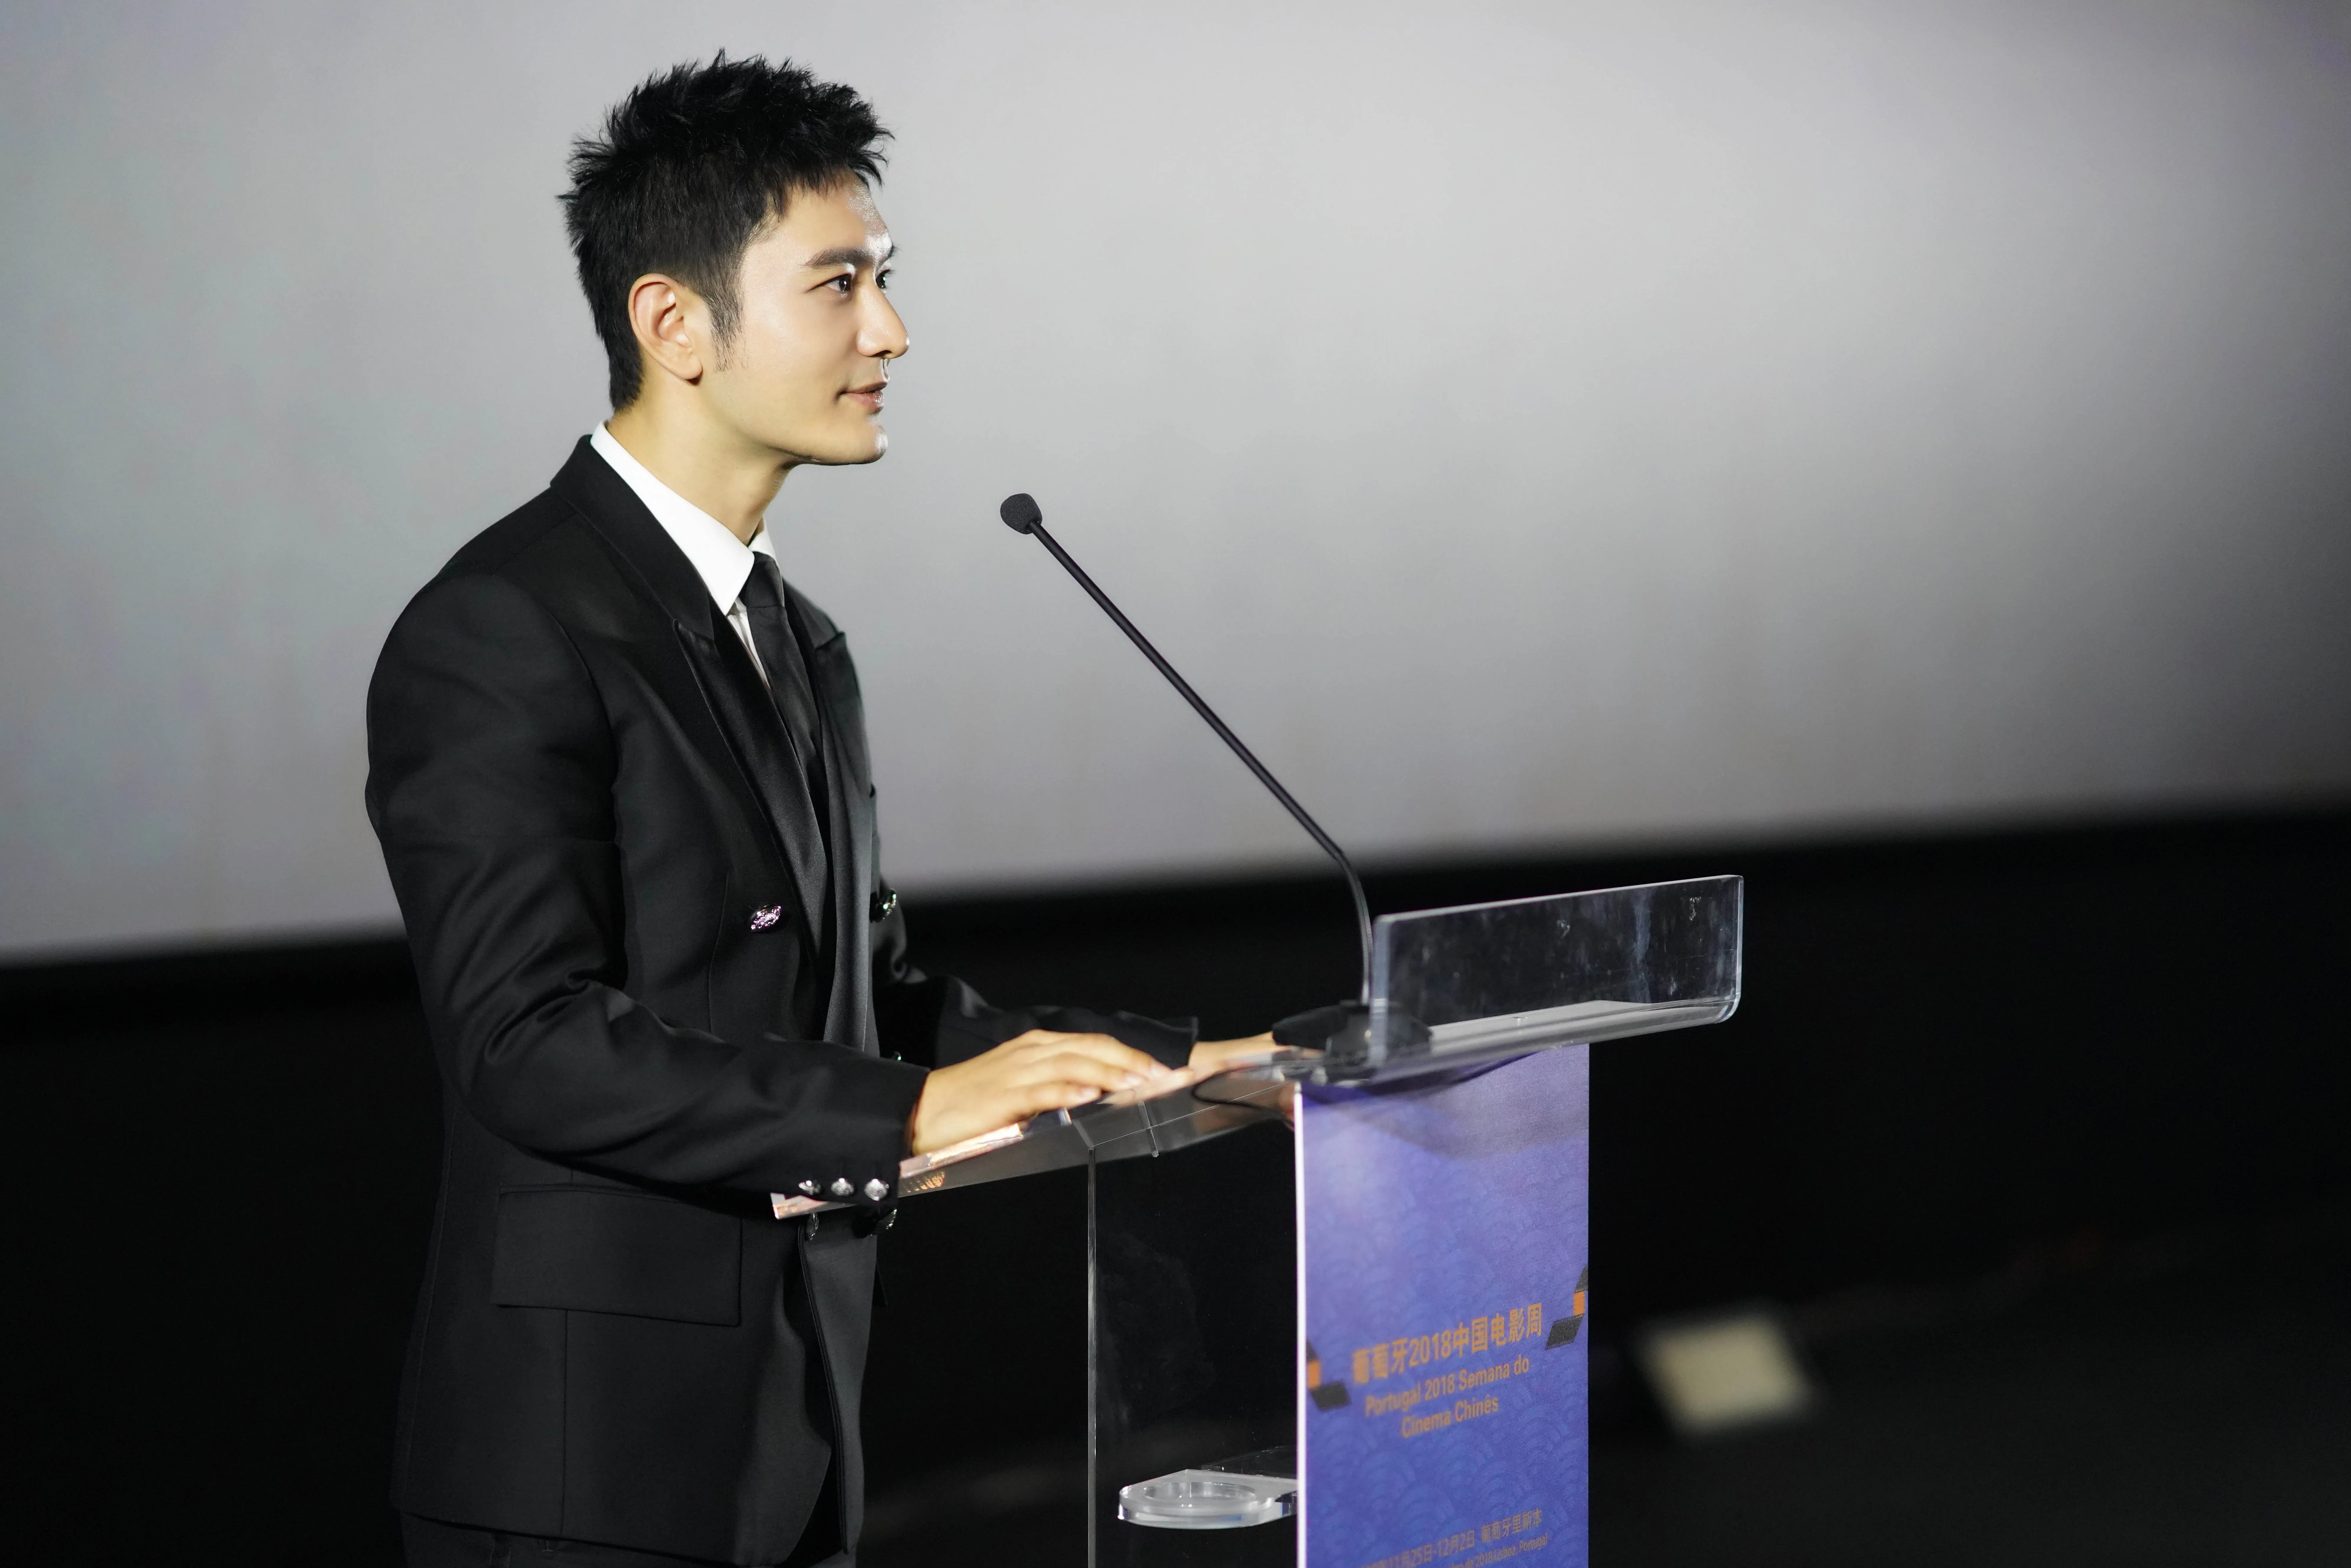 Opening of sino-portuguese film cultural exchange week - Xiaoming Huang spoke as the actor's representative